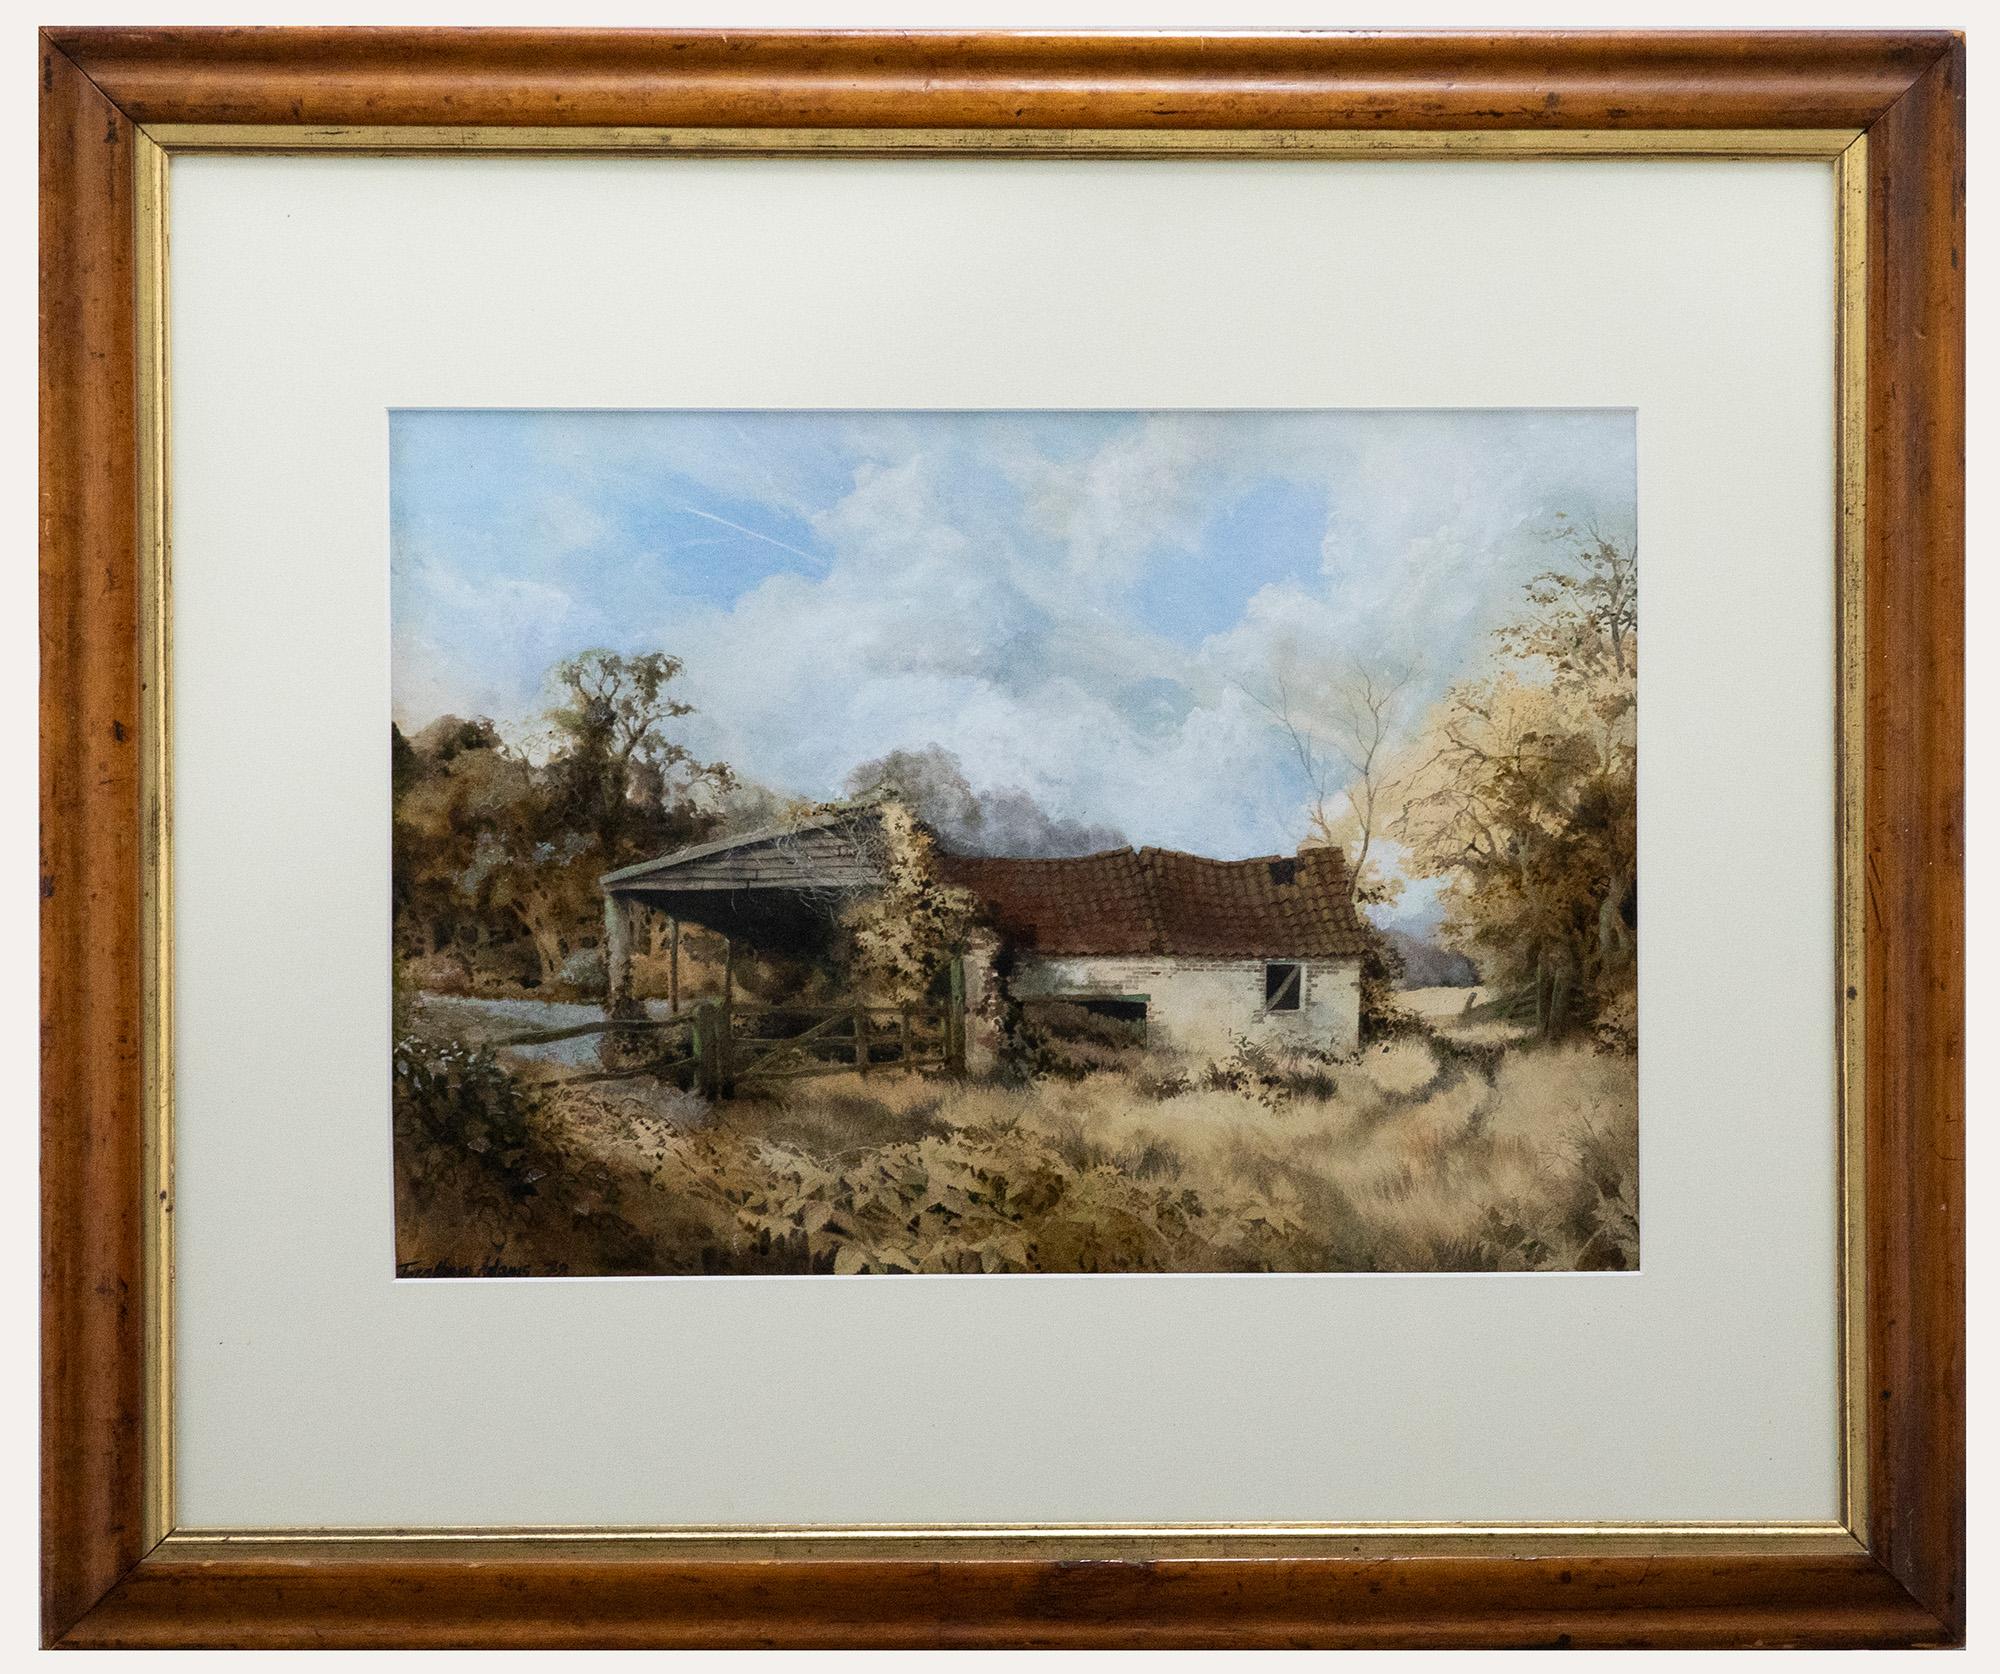 A charming watercolour study of an oil barn in Suffolk with a wooden lean-to. The artist captures the rugged barn and its wild surroundings in fine detail. Signed and dated to the lower left. Presented in a maple veneered frame. On paper.